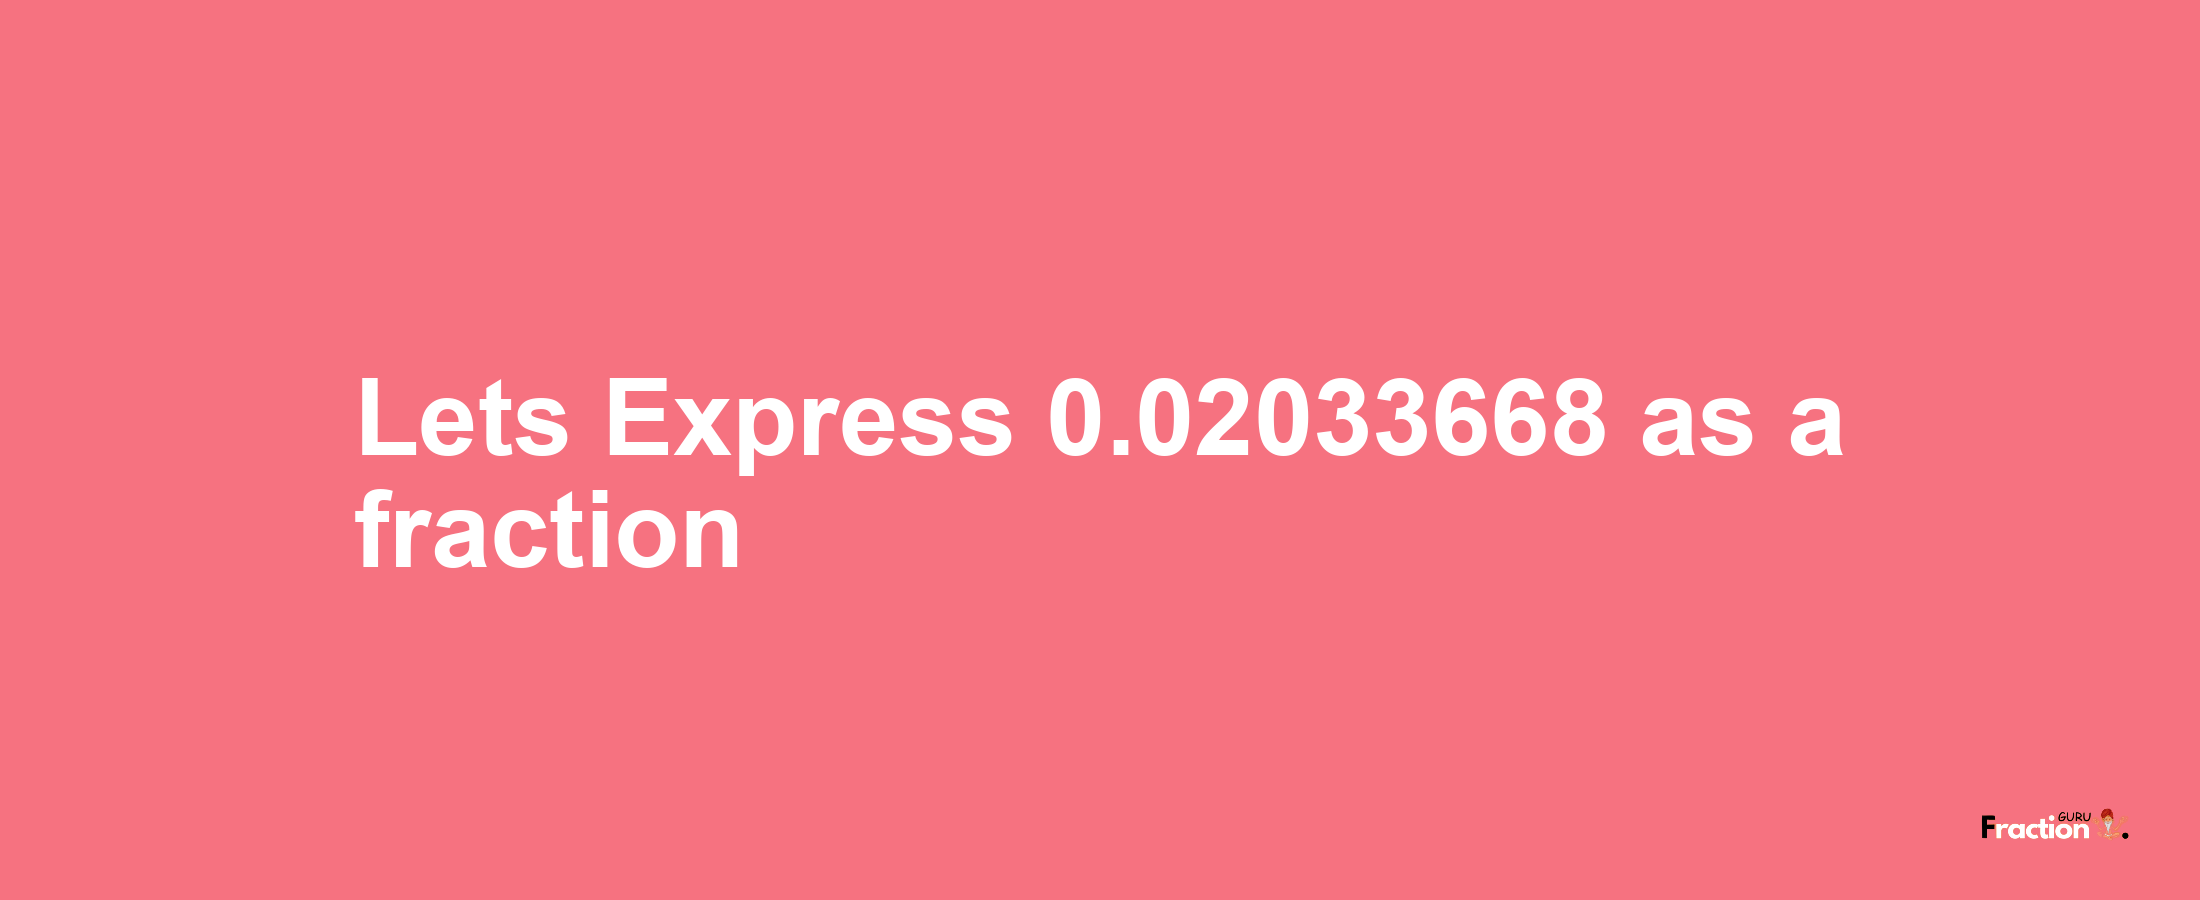 Lets Express 0.02033668 as afraction